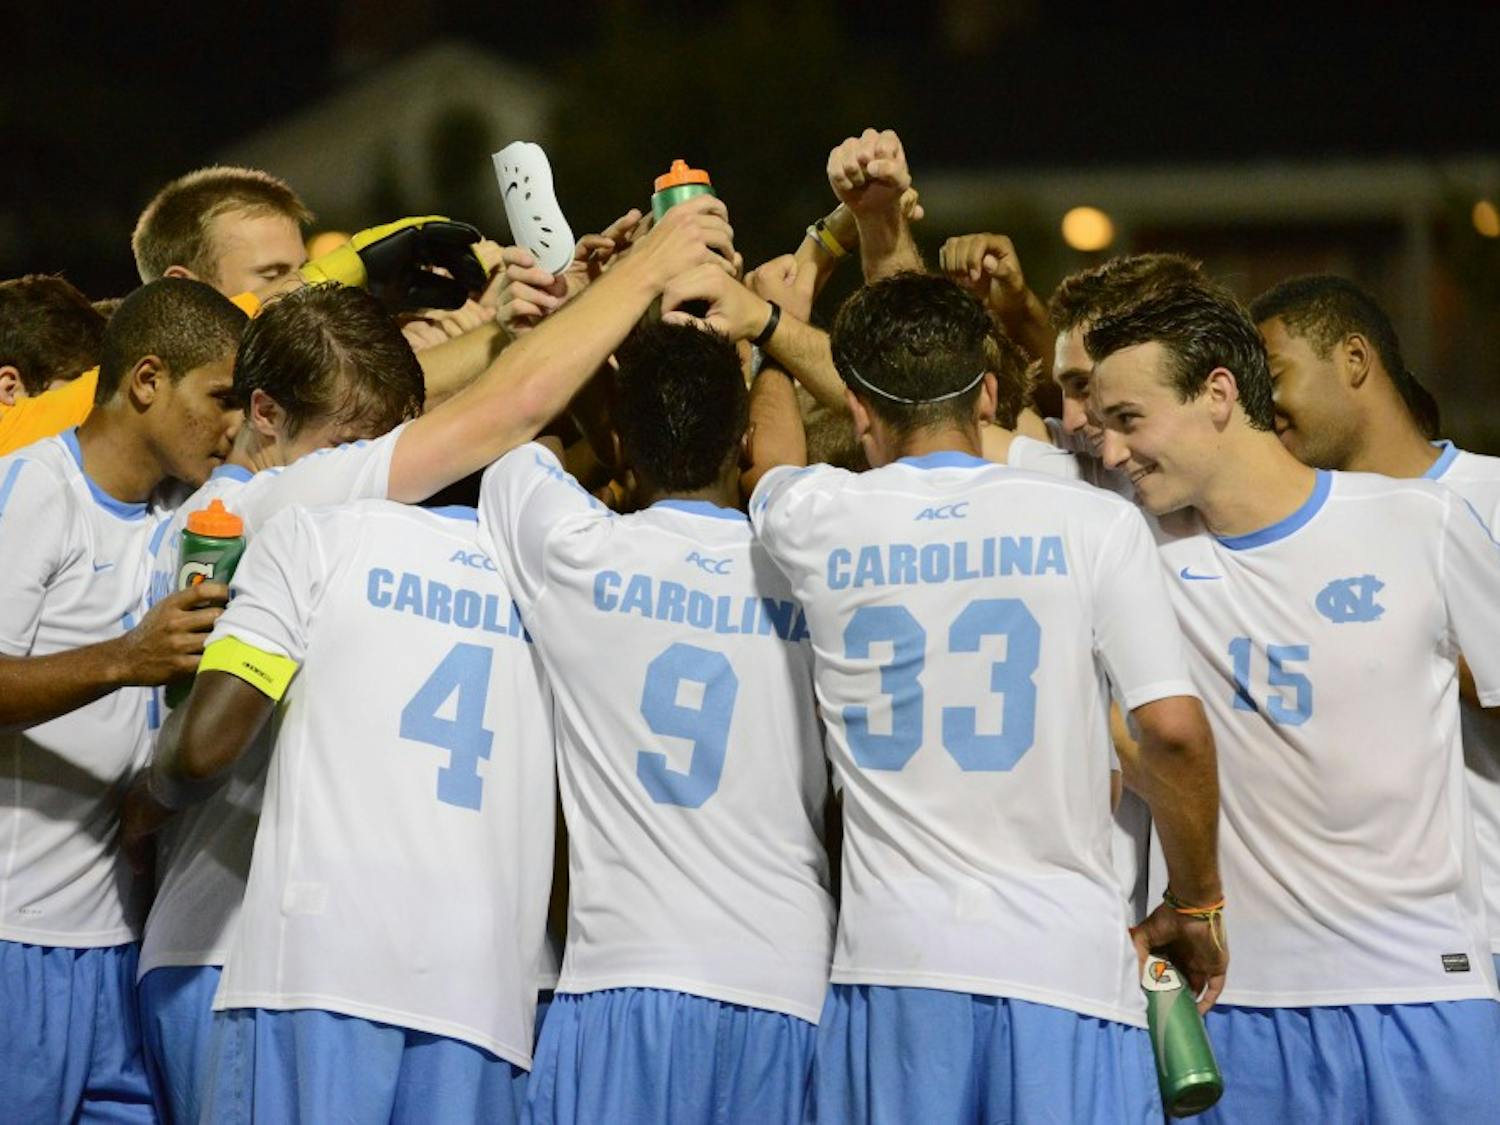 UNC huddles after defeating Monmouth 1-0 in the second overtime period.